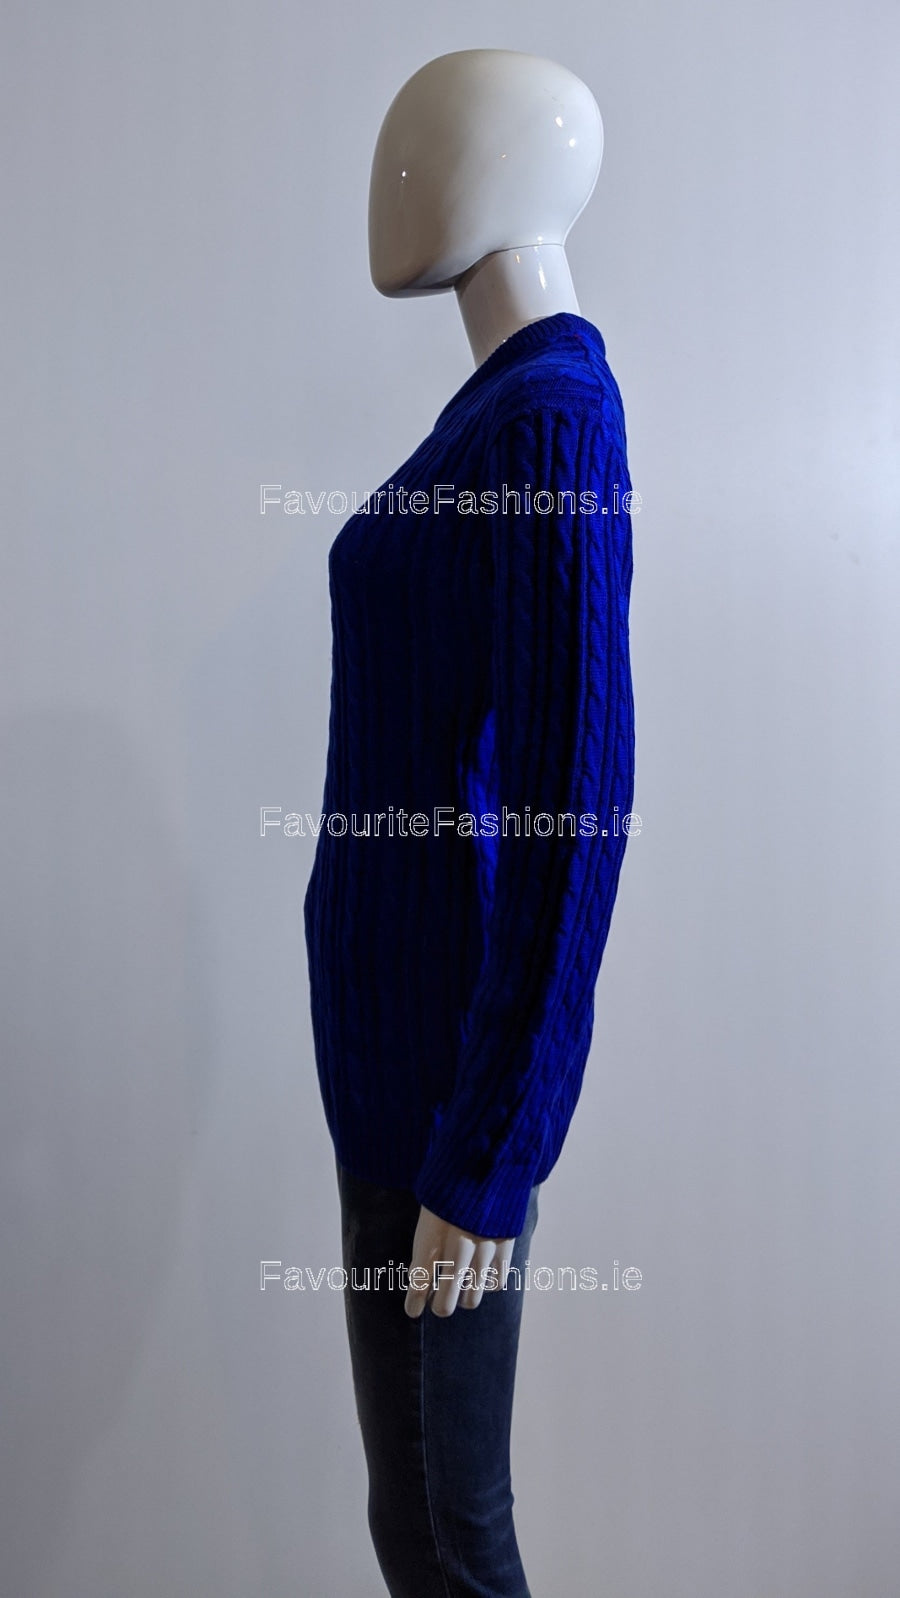 Royal Blue Round Neck Cable Knit Jumper